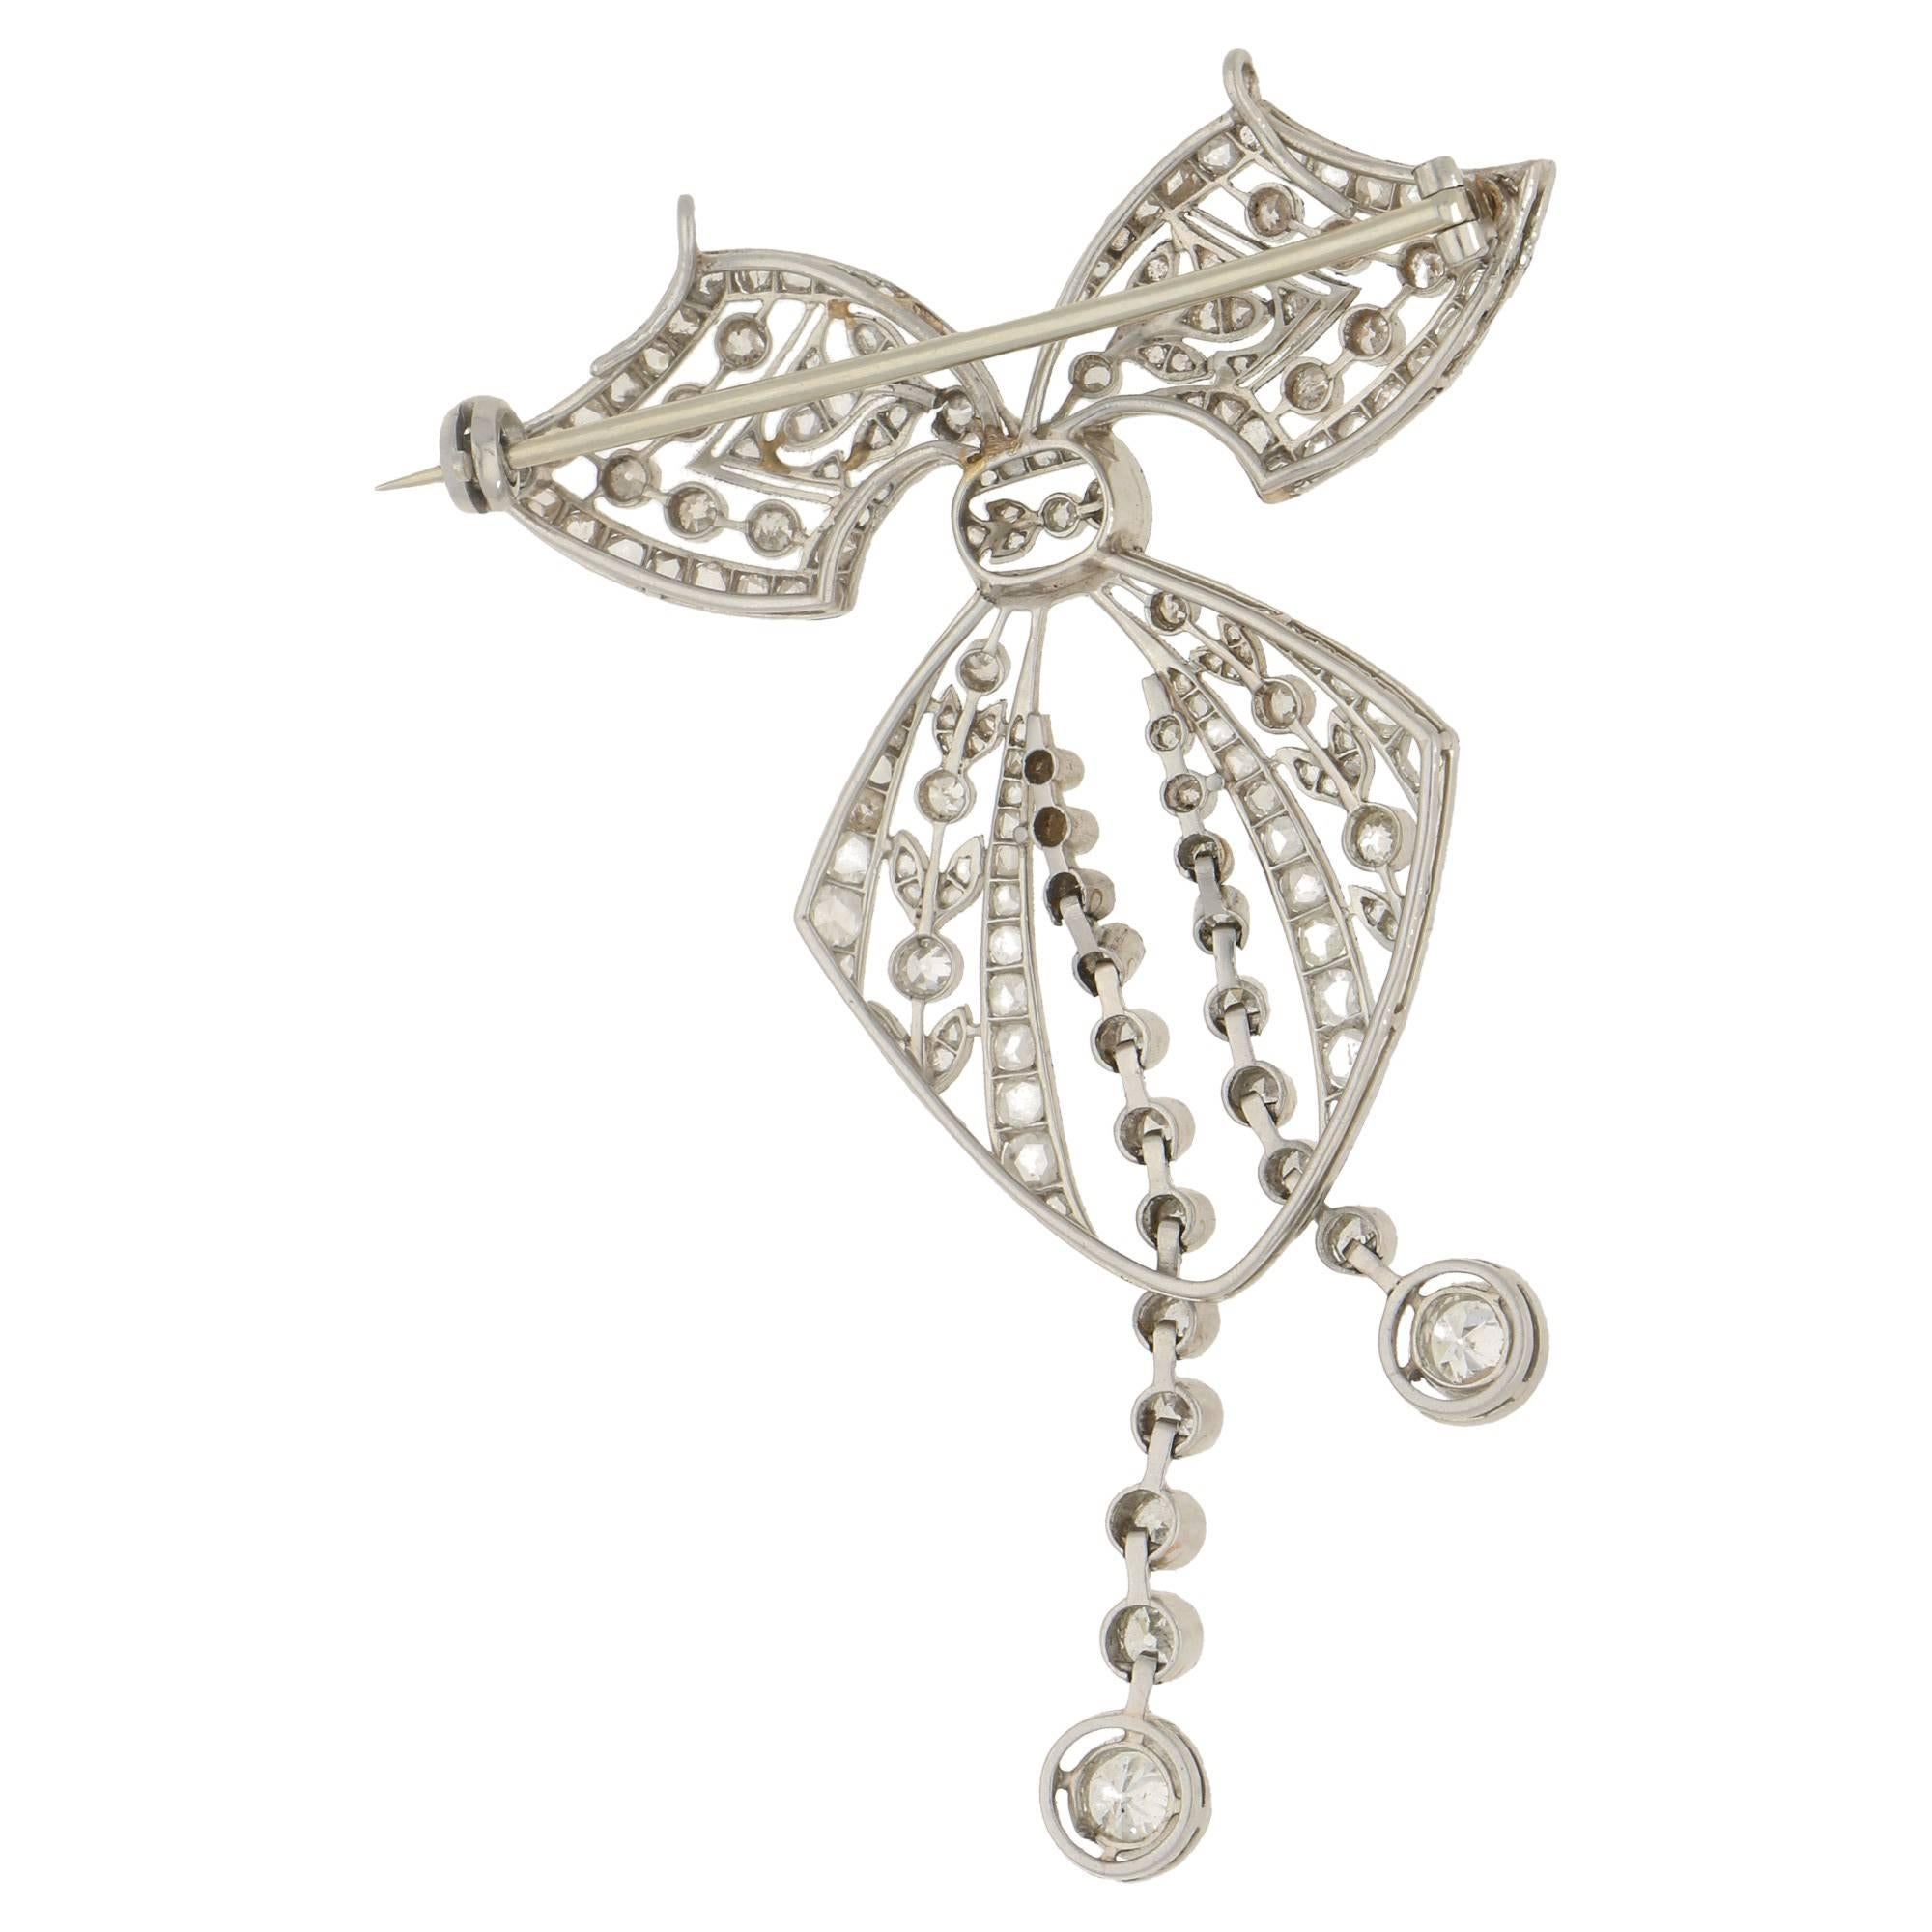 A diamond set negligee bow brooch. The early 20th century brooch is formed of fine hand pierced platinum openwork. The main body of the brooch is set with eight cut diamonds and the negligee motif is formed of a graduated line of eight cut and old